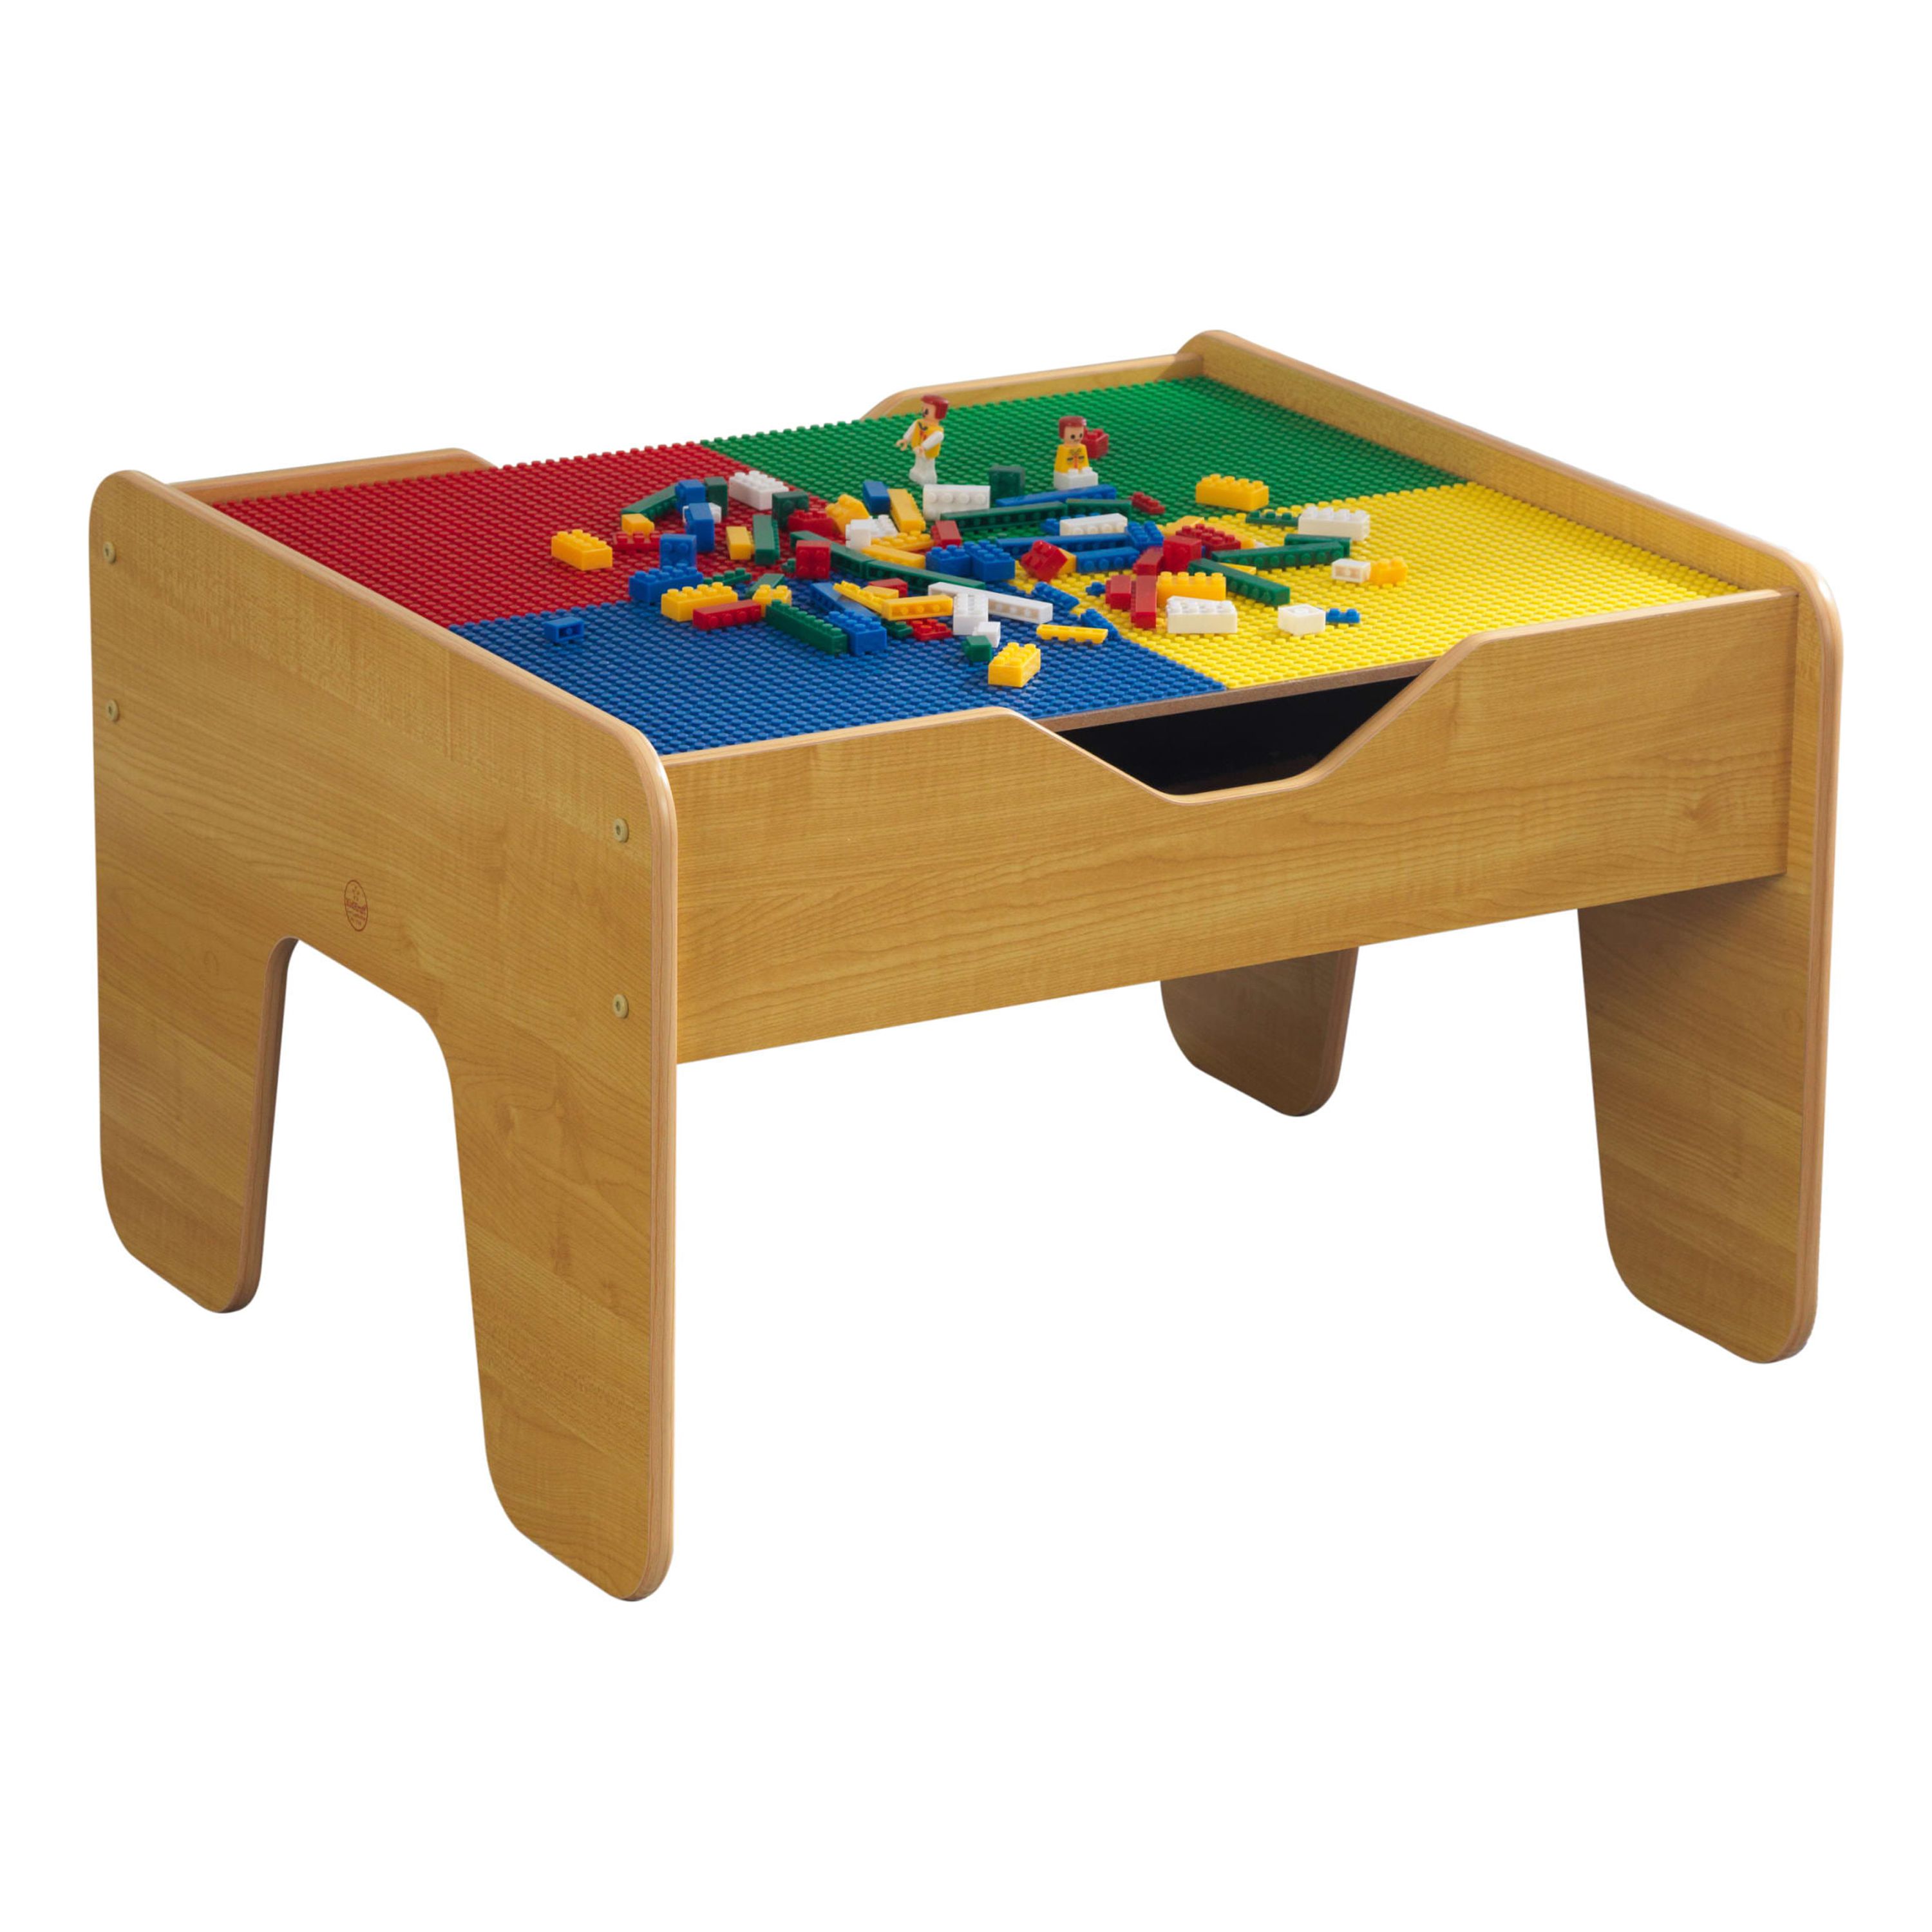 KidKraft Reversible Wooden Activity Table with Board and Train Set, Natural, for Ages 3+ Years - image 1 of 11